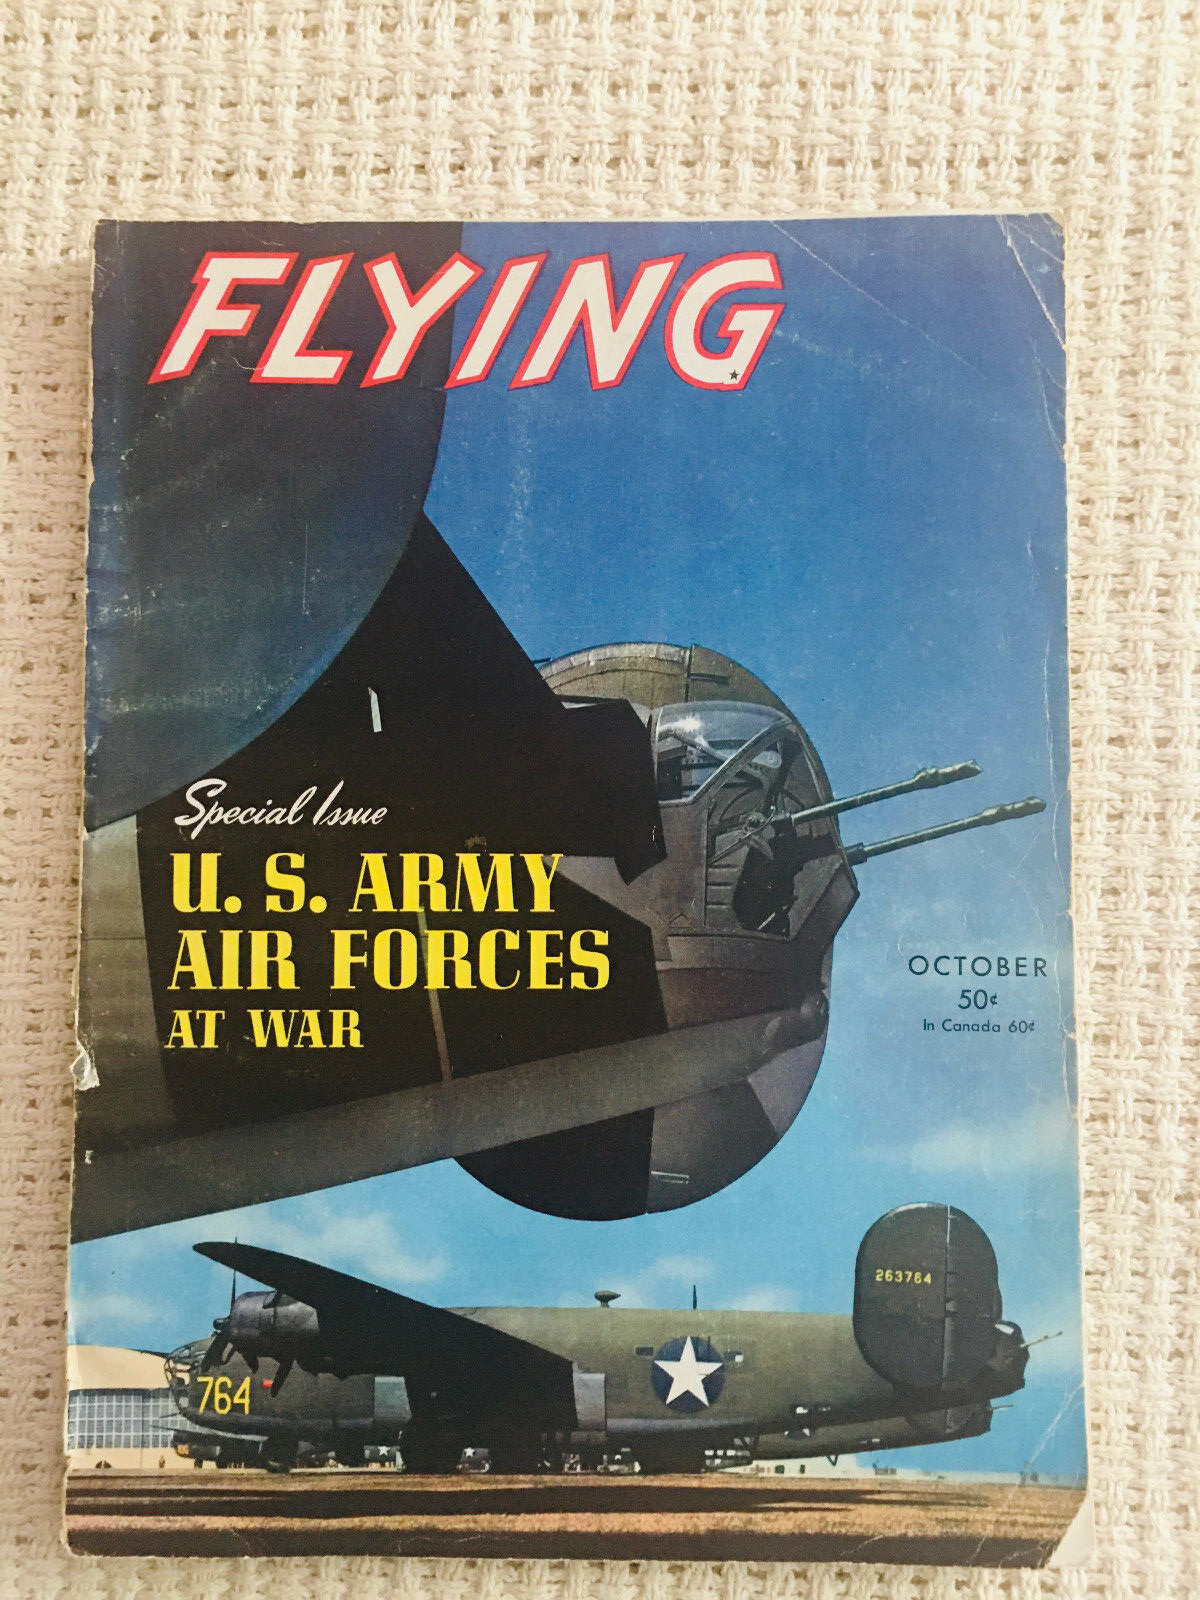 FLYING U.S. Army Air Forces ISSUE Octover 1943 Vol. 33 No. 4 GOOD